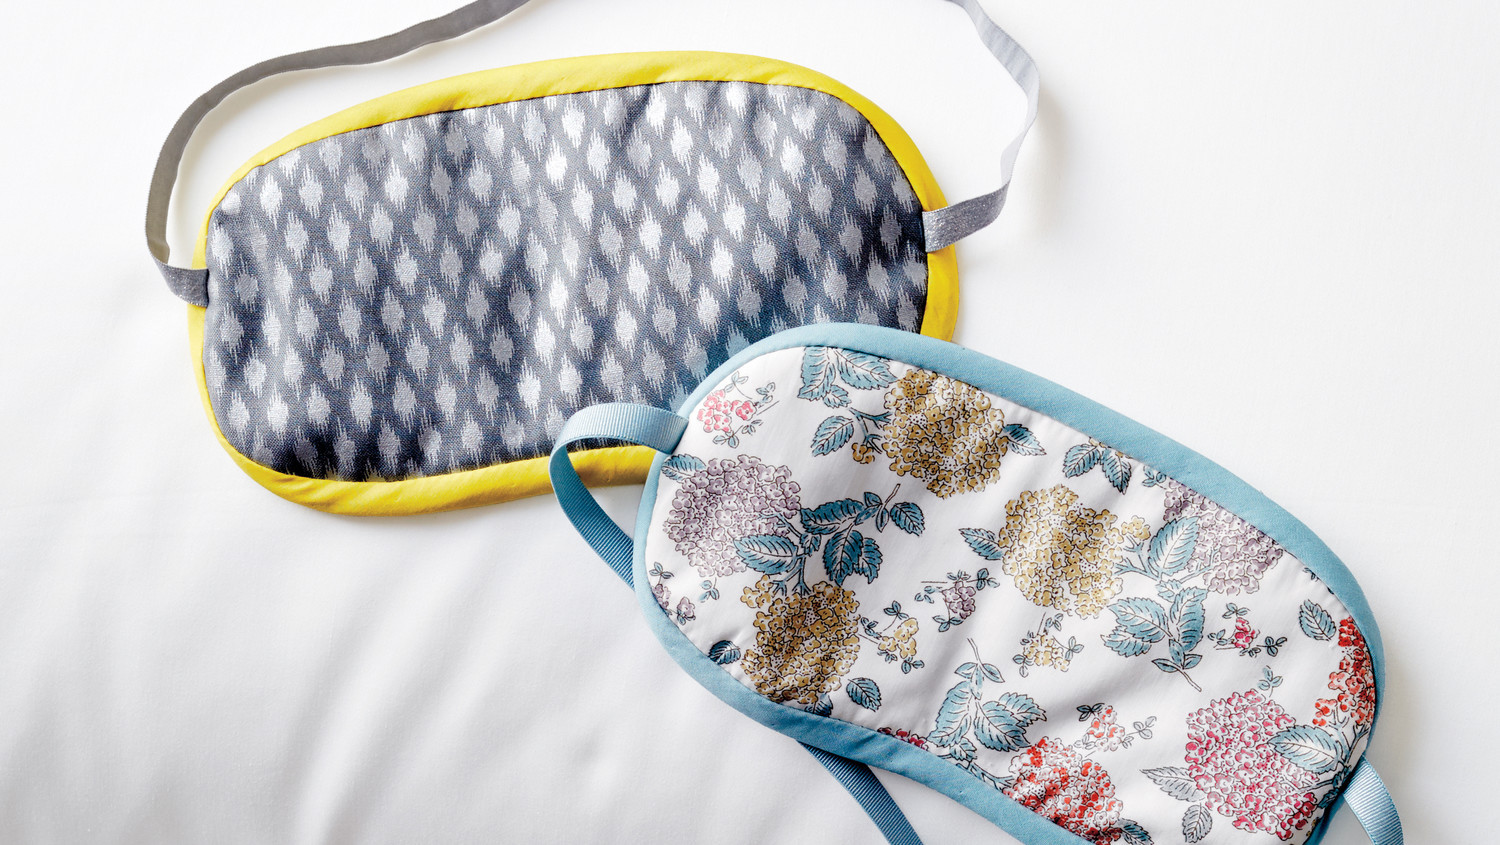 DIY Sleep Masks
 How to Sew a Simple Sleep Mask for a Better Night’s Rest